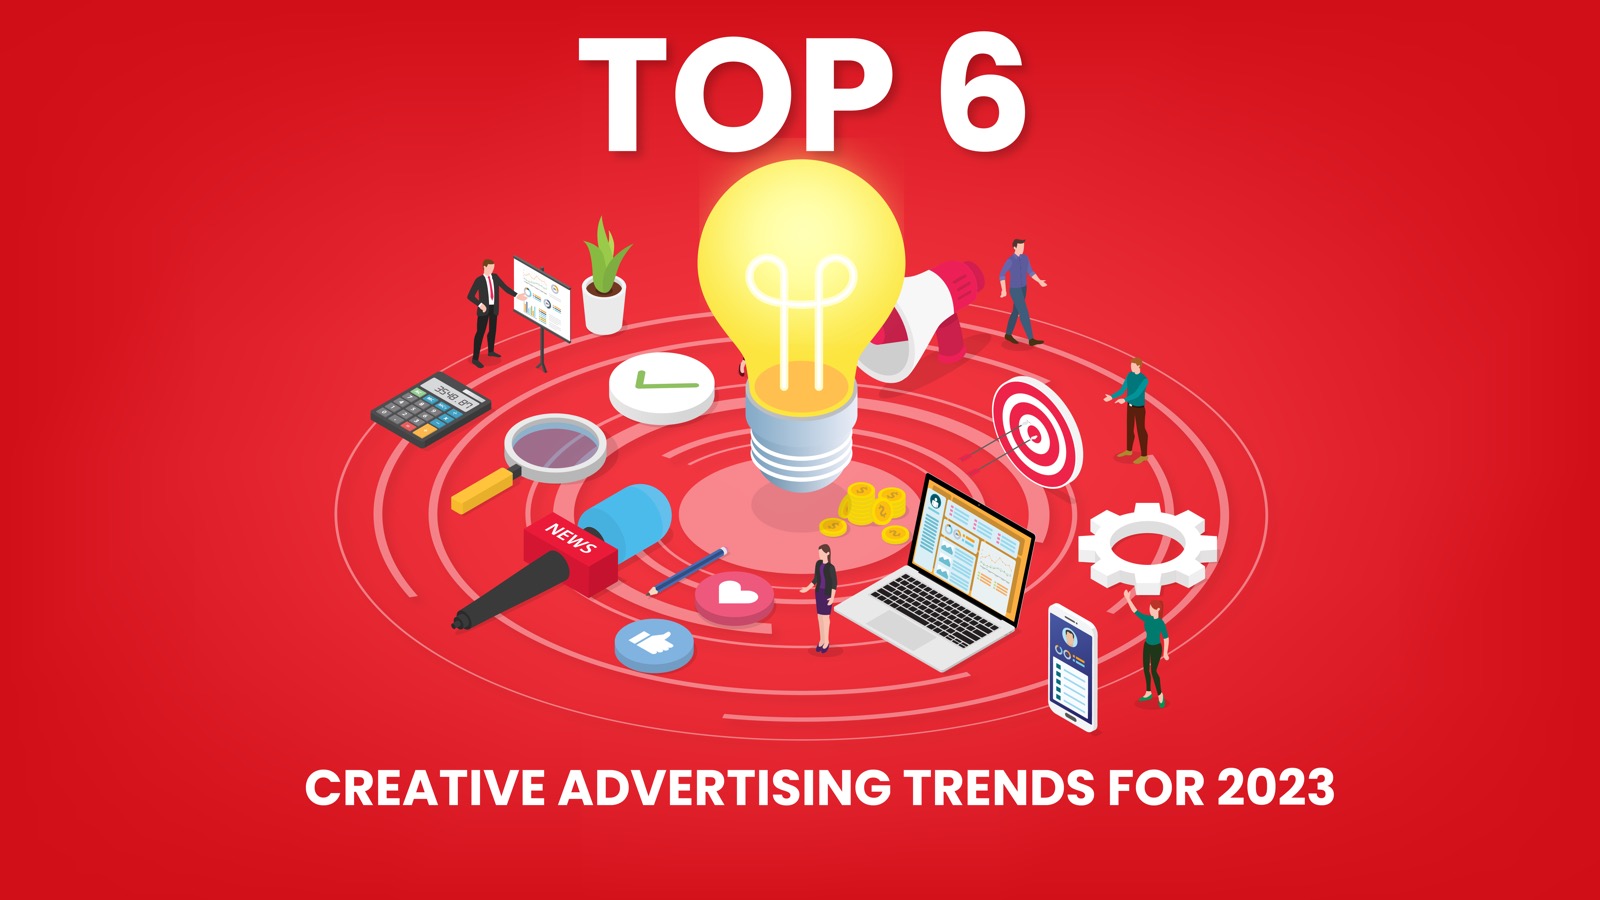 TOP 6 CREATIVE ADVERTISING TRENDS FOR 2023